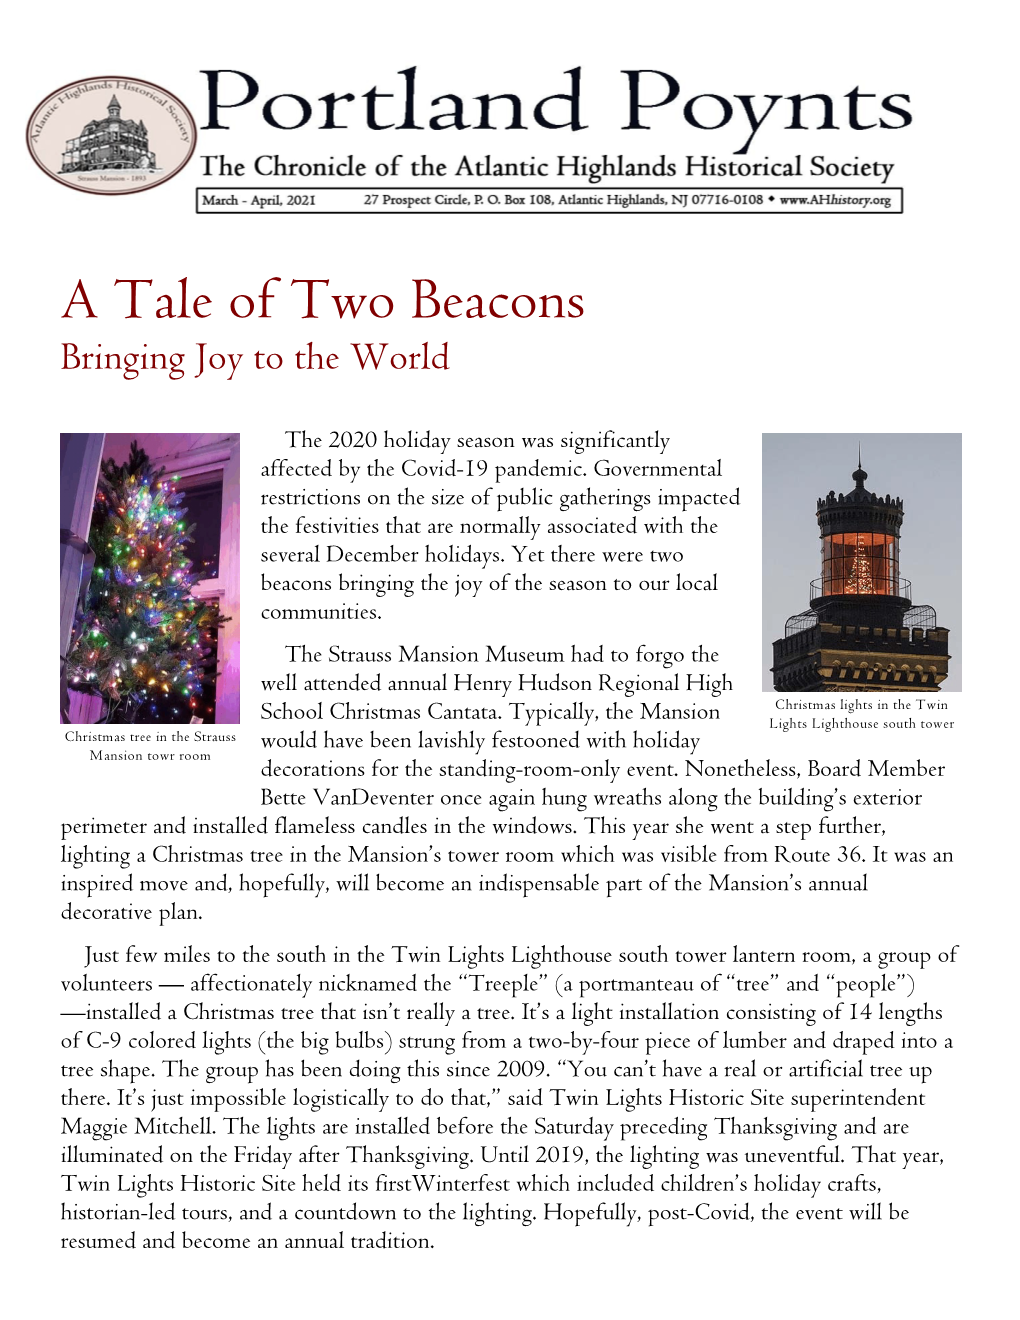 A Tale of Two Beacons Bringing Joy to the World